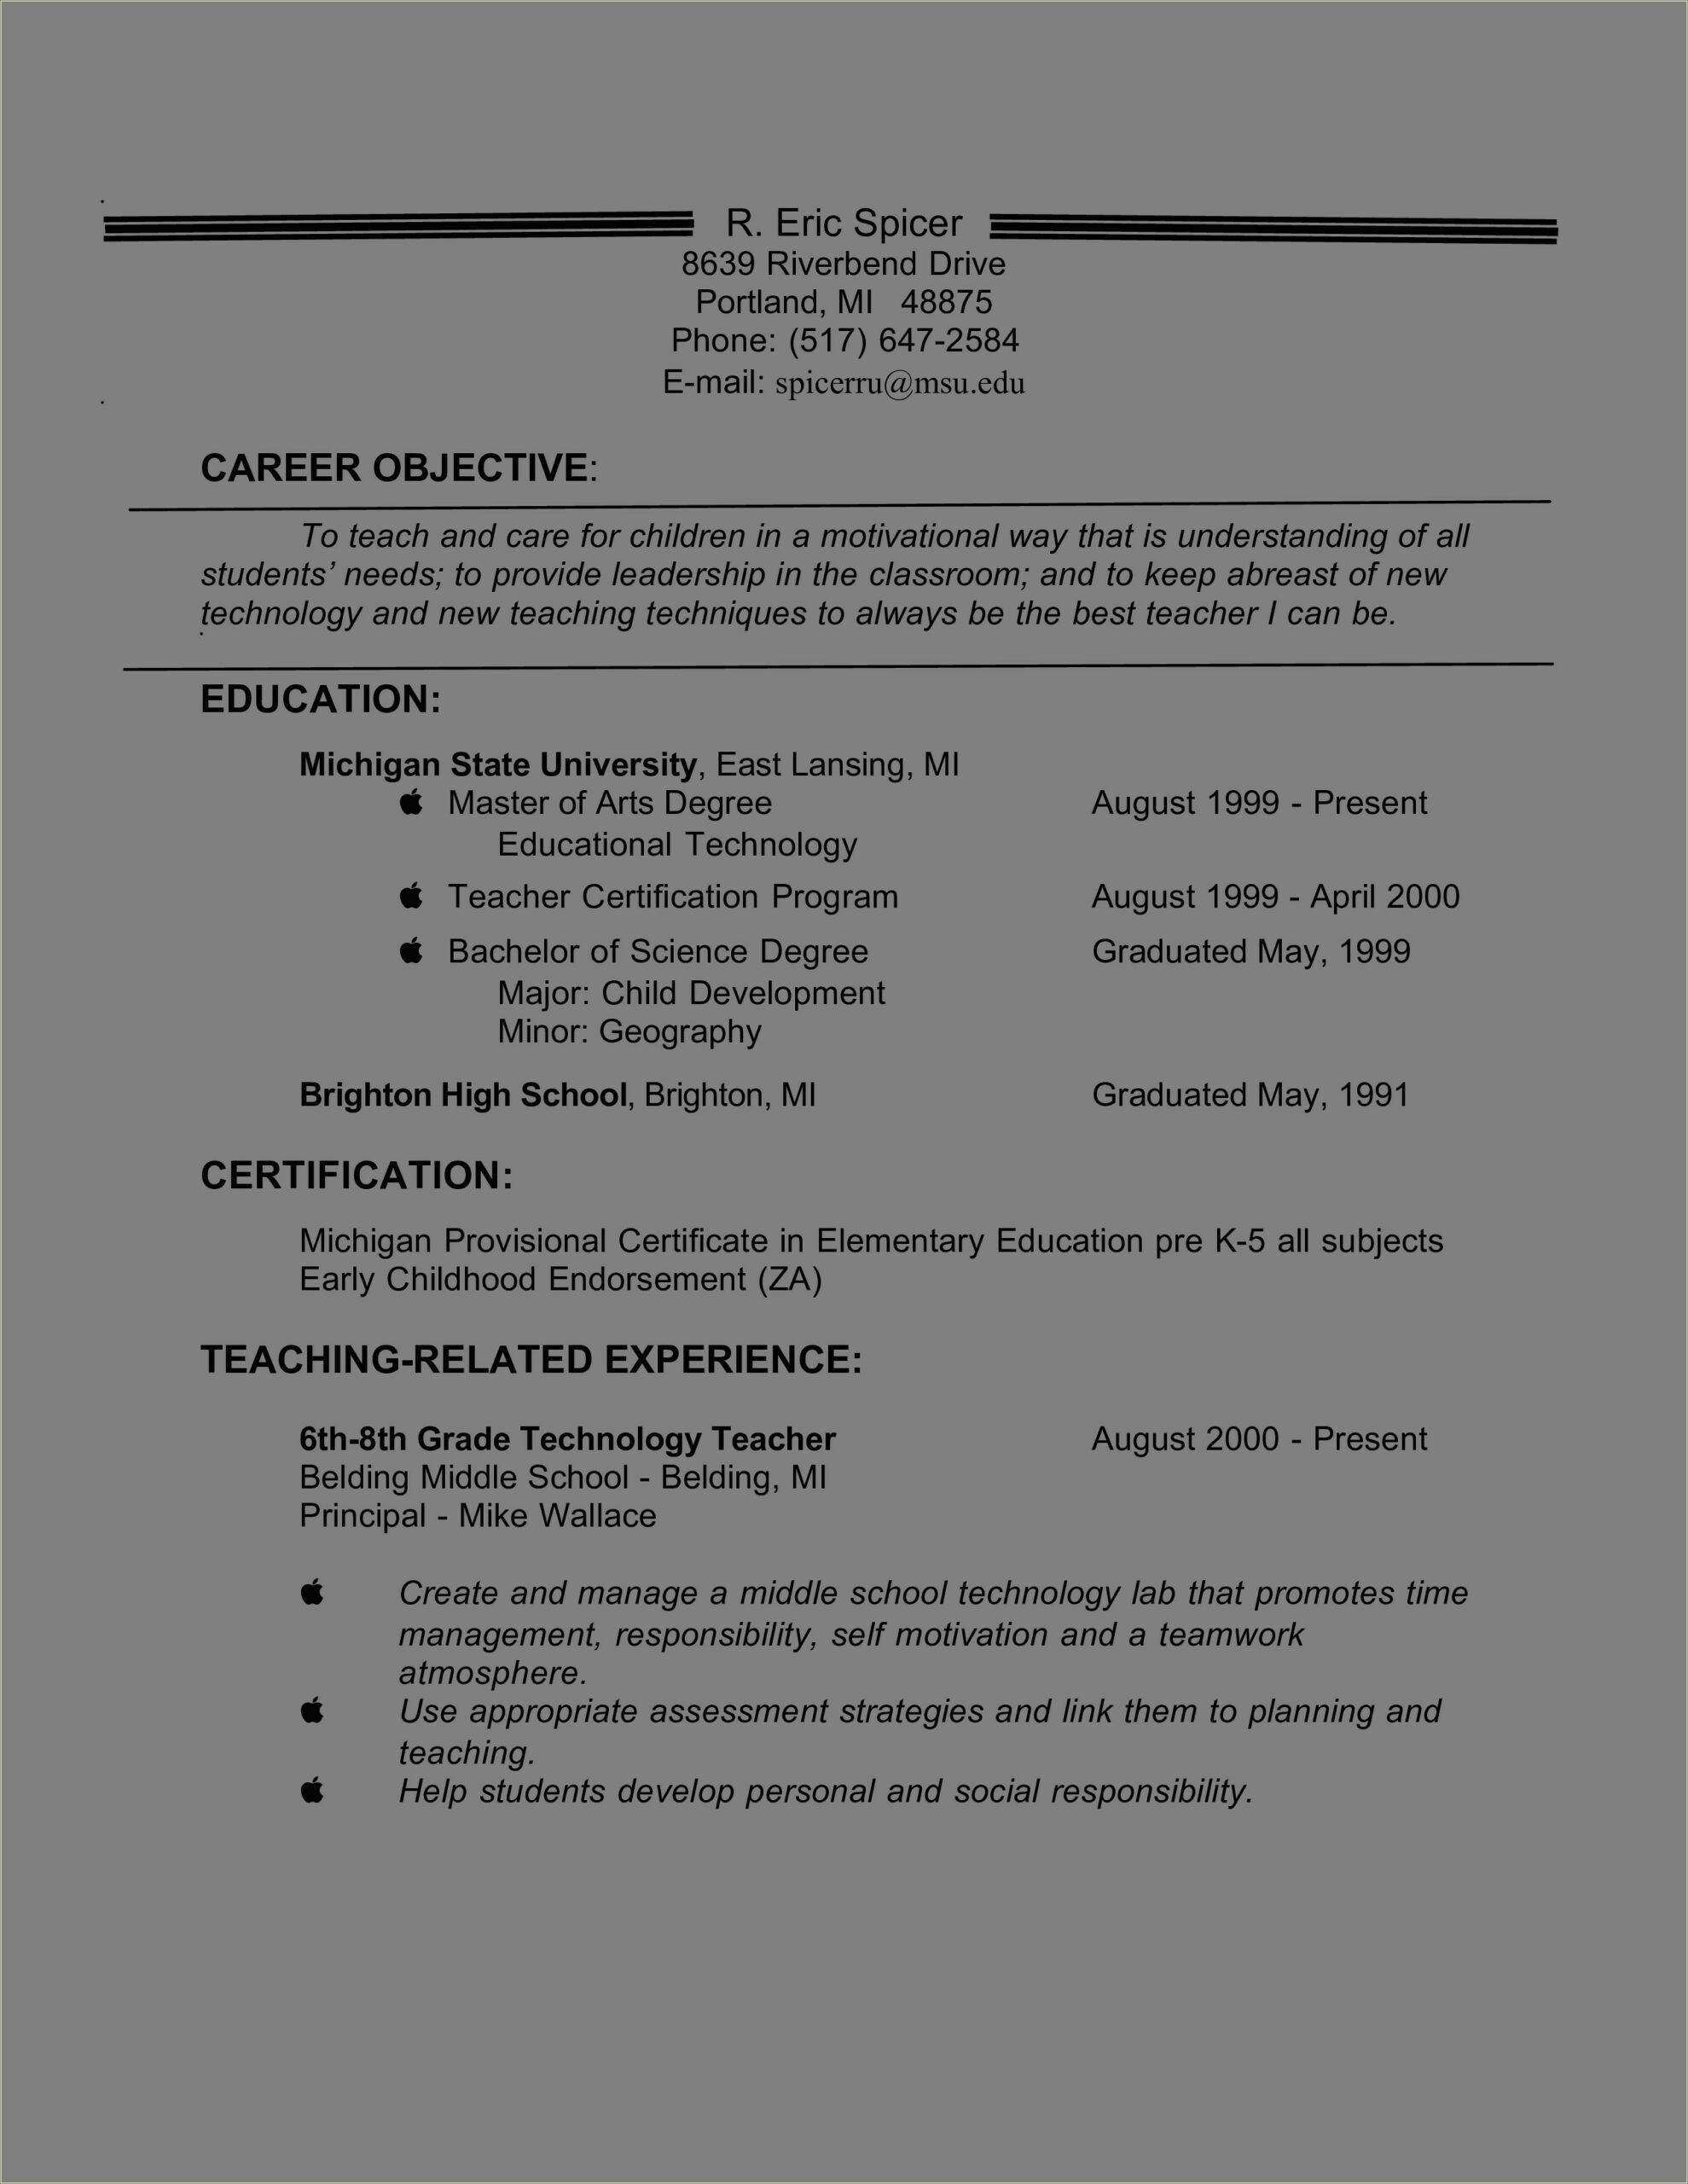 Samples Of Teacher Resumes With Objective